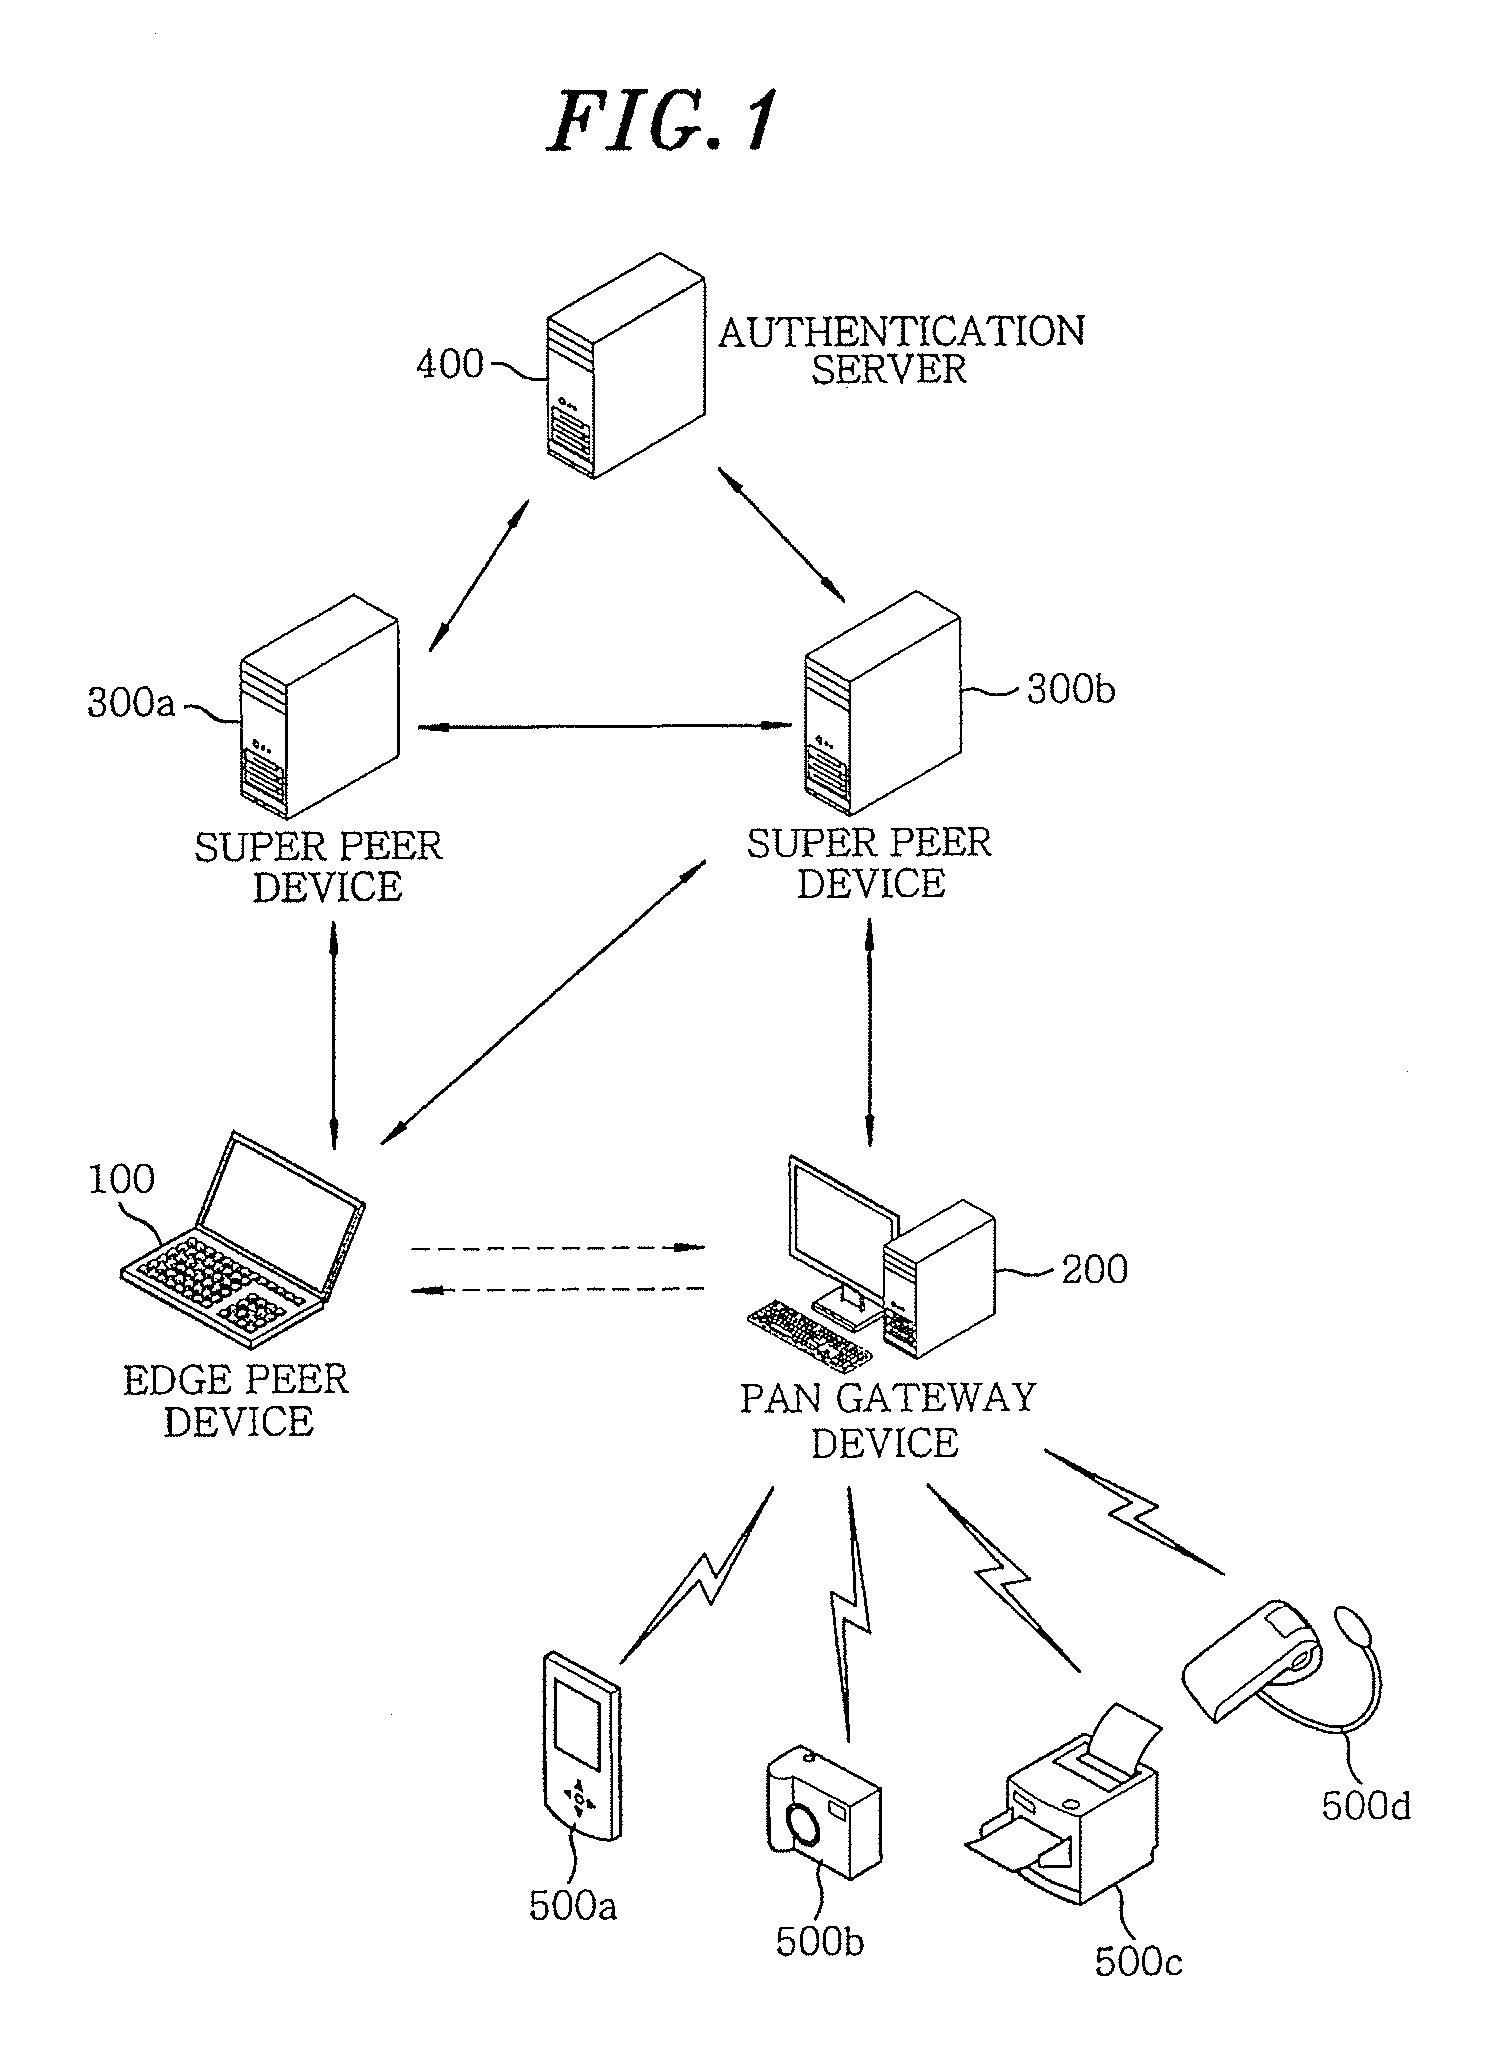 Edge peer device, pan gateway device, super peer device, and p2p network-based interconnection method